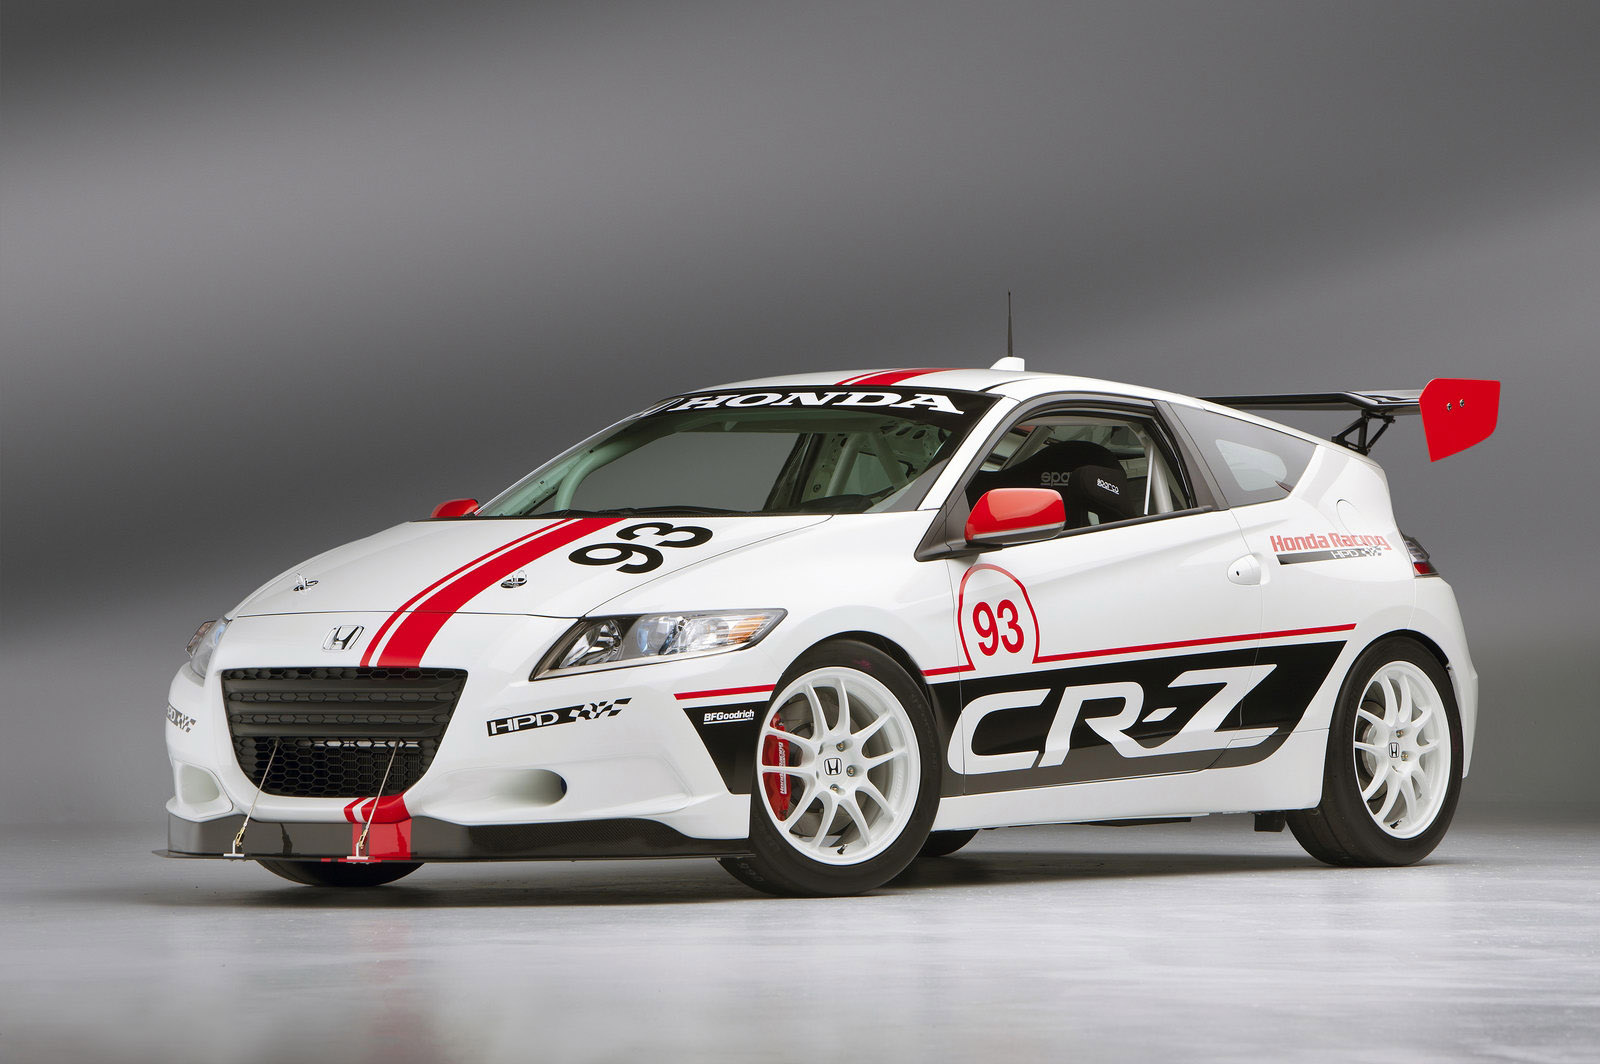 From cute hybrid to hot hatch: Trackside with the HPD supercharged Honda CR- Z - CNET